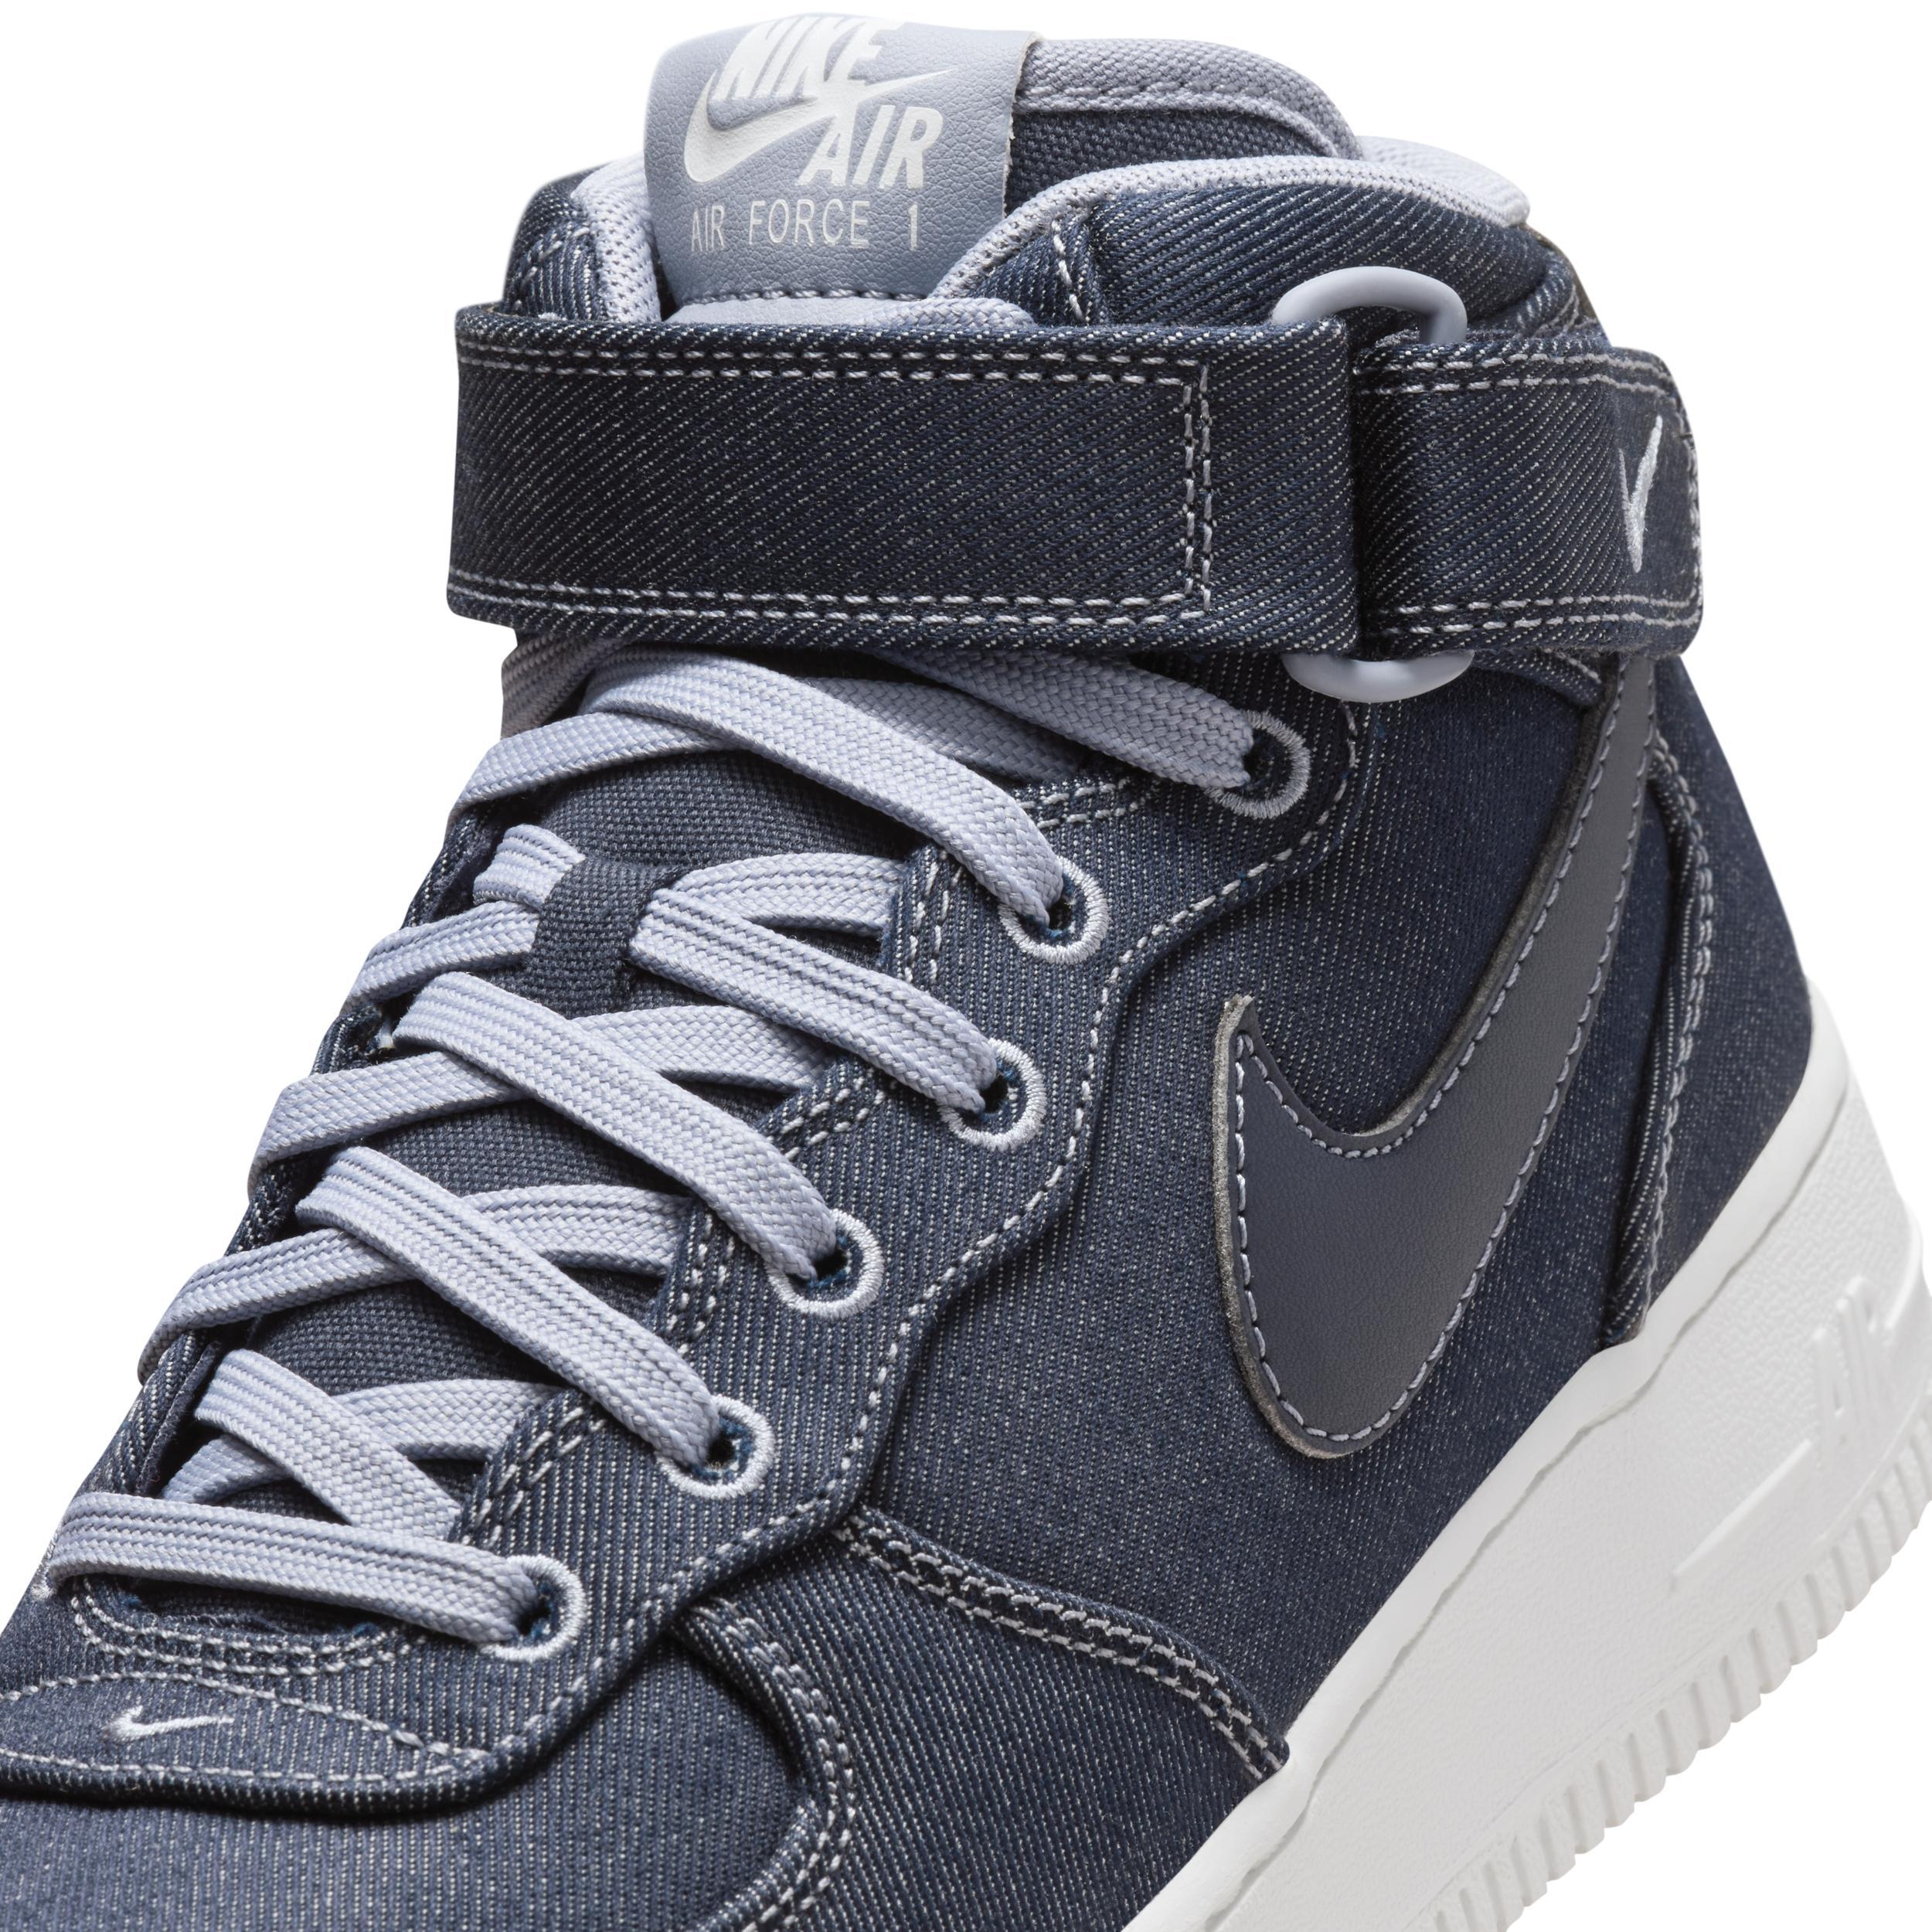 Nike Women's Air Force 1 '07 Mid Shoes Product Image